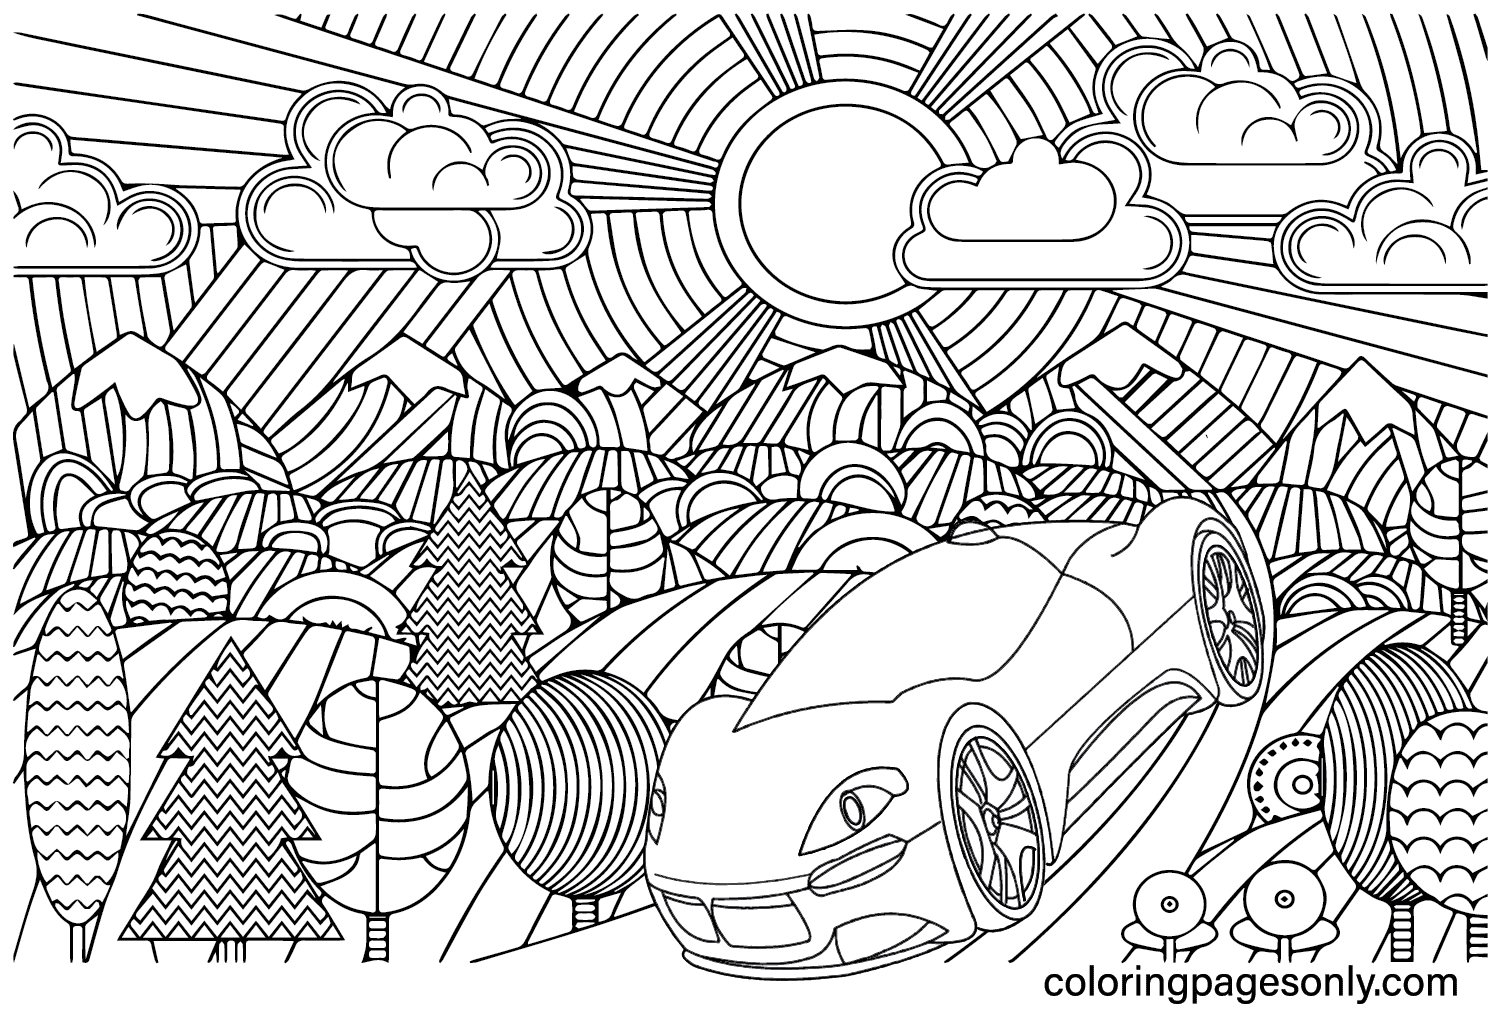 Bugatti Coloring Pages to for Kids from Bugatti